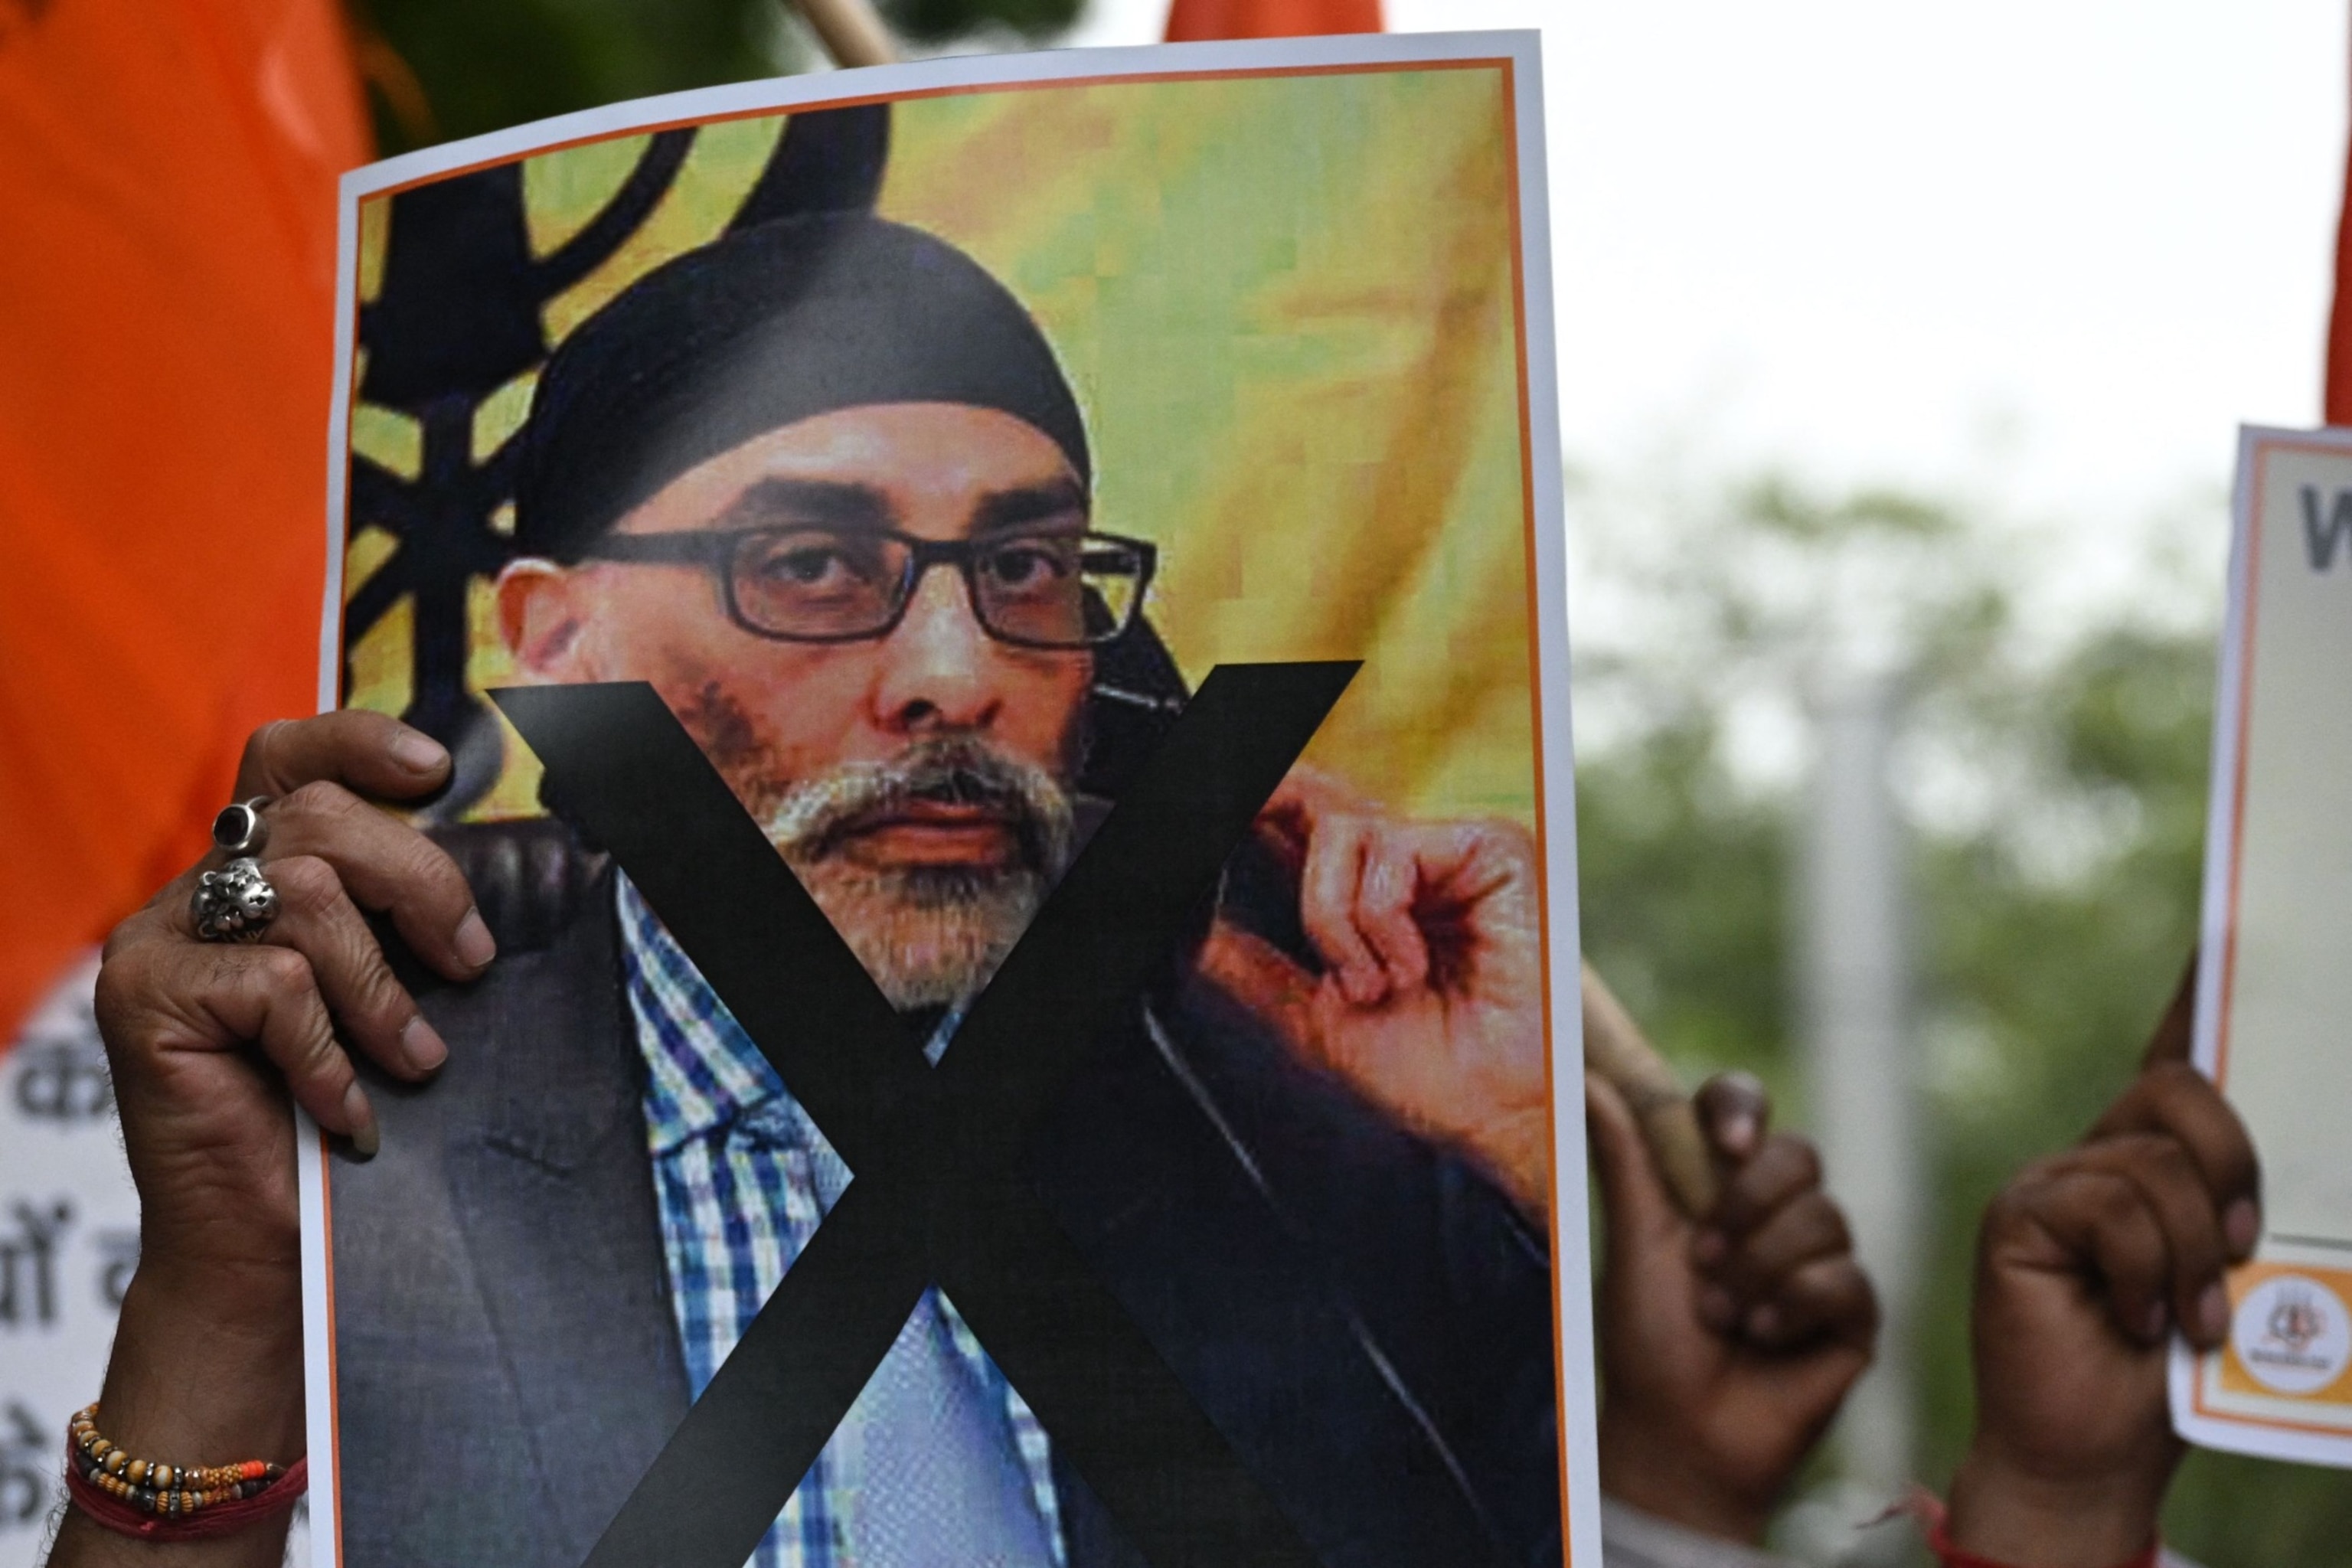 PHOTO: A member of United Hindu Front organization holds a banner depicting Gurpatwant Singh Pannun, a lawyer believed to be based in Canada during a rally along a street in New Delhi, Sept. 24, 2023.